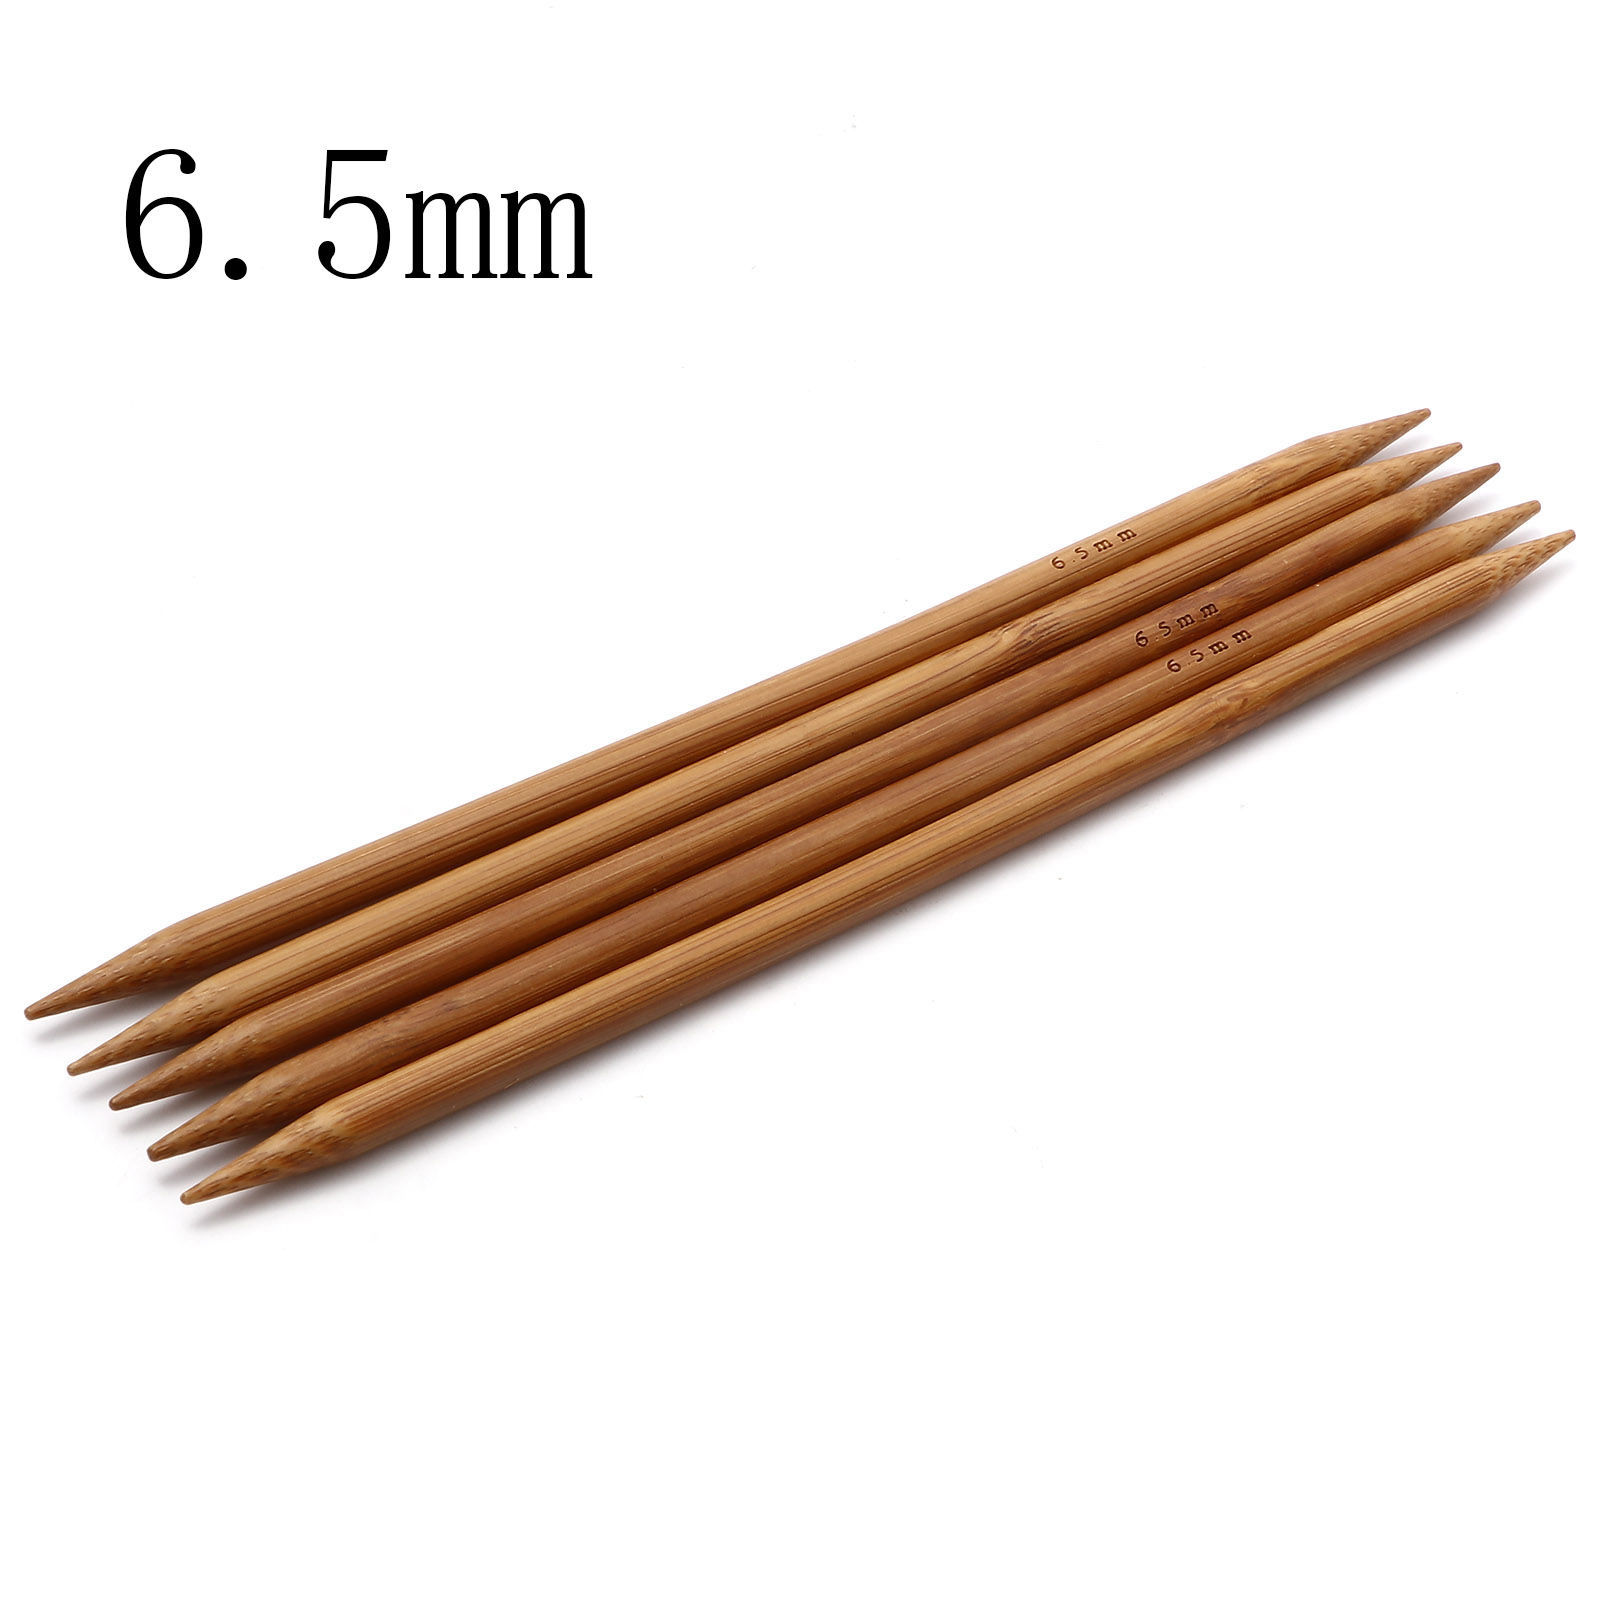 Picture of (US10.5 6.5mm) Bamboo Double Pointed Knitting Needles Brown 20cm(7 7/8") long, 5 PCs